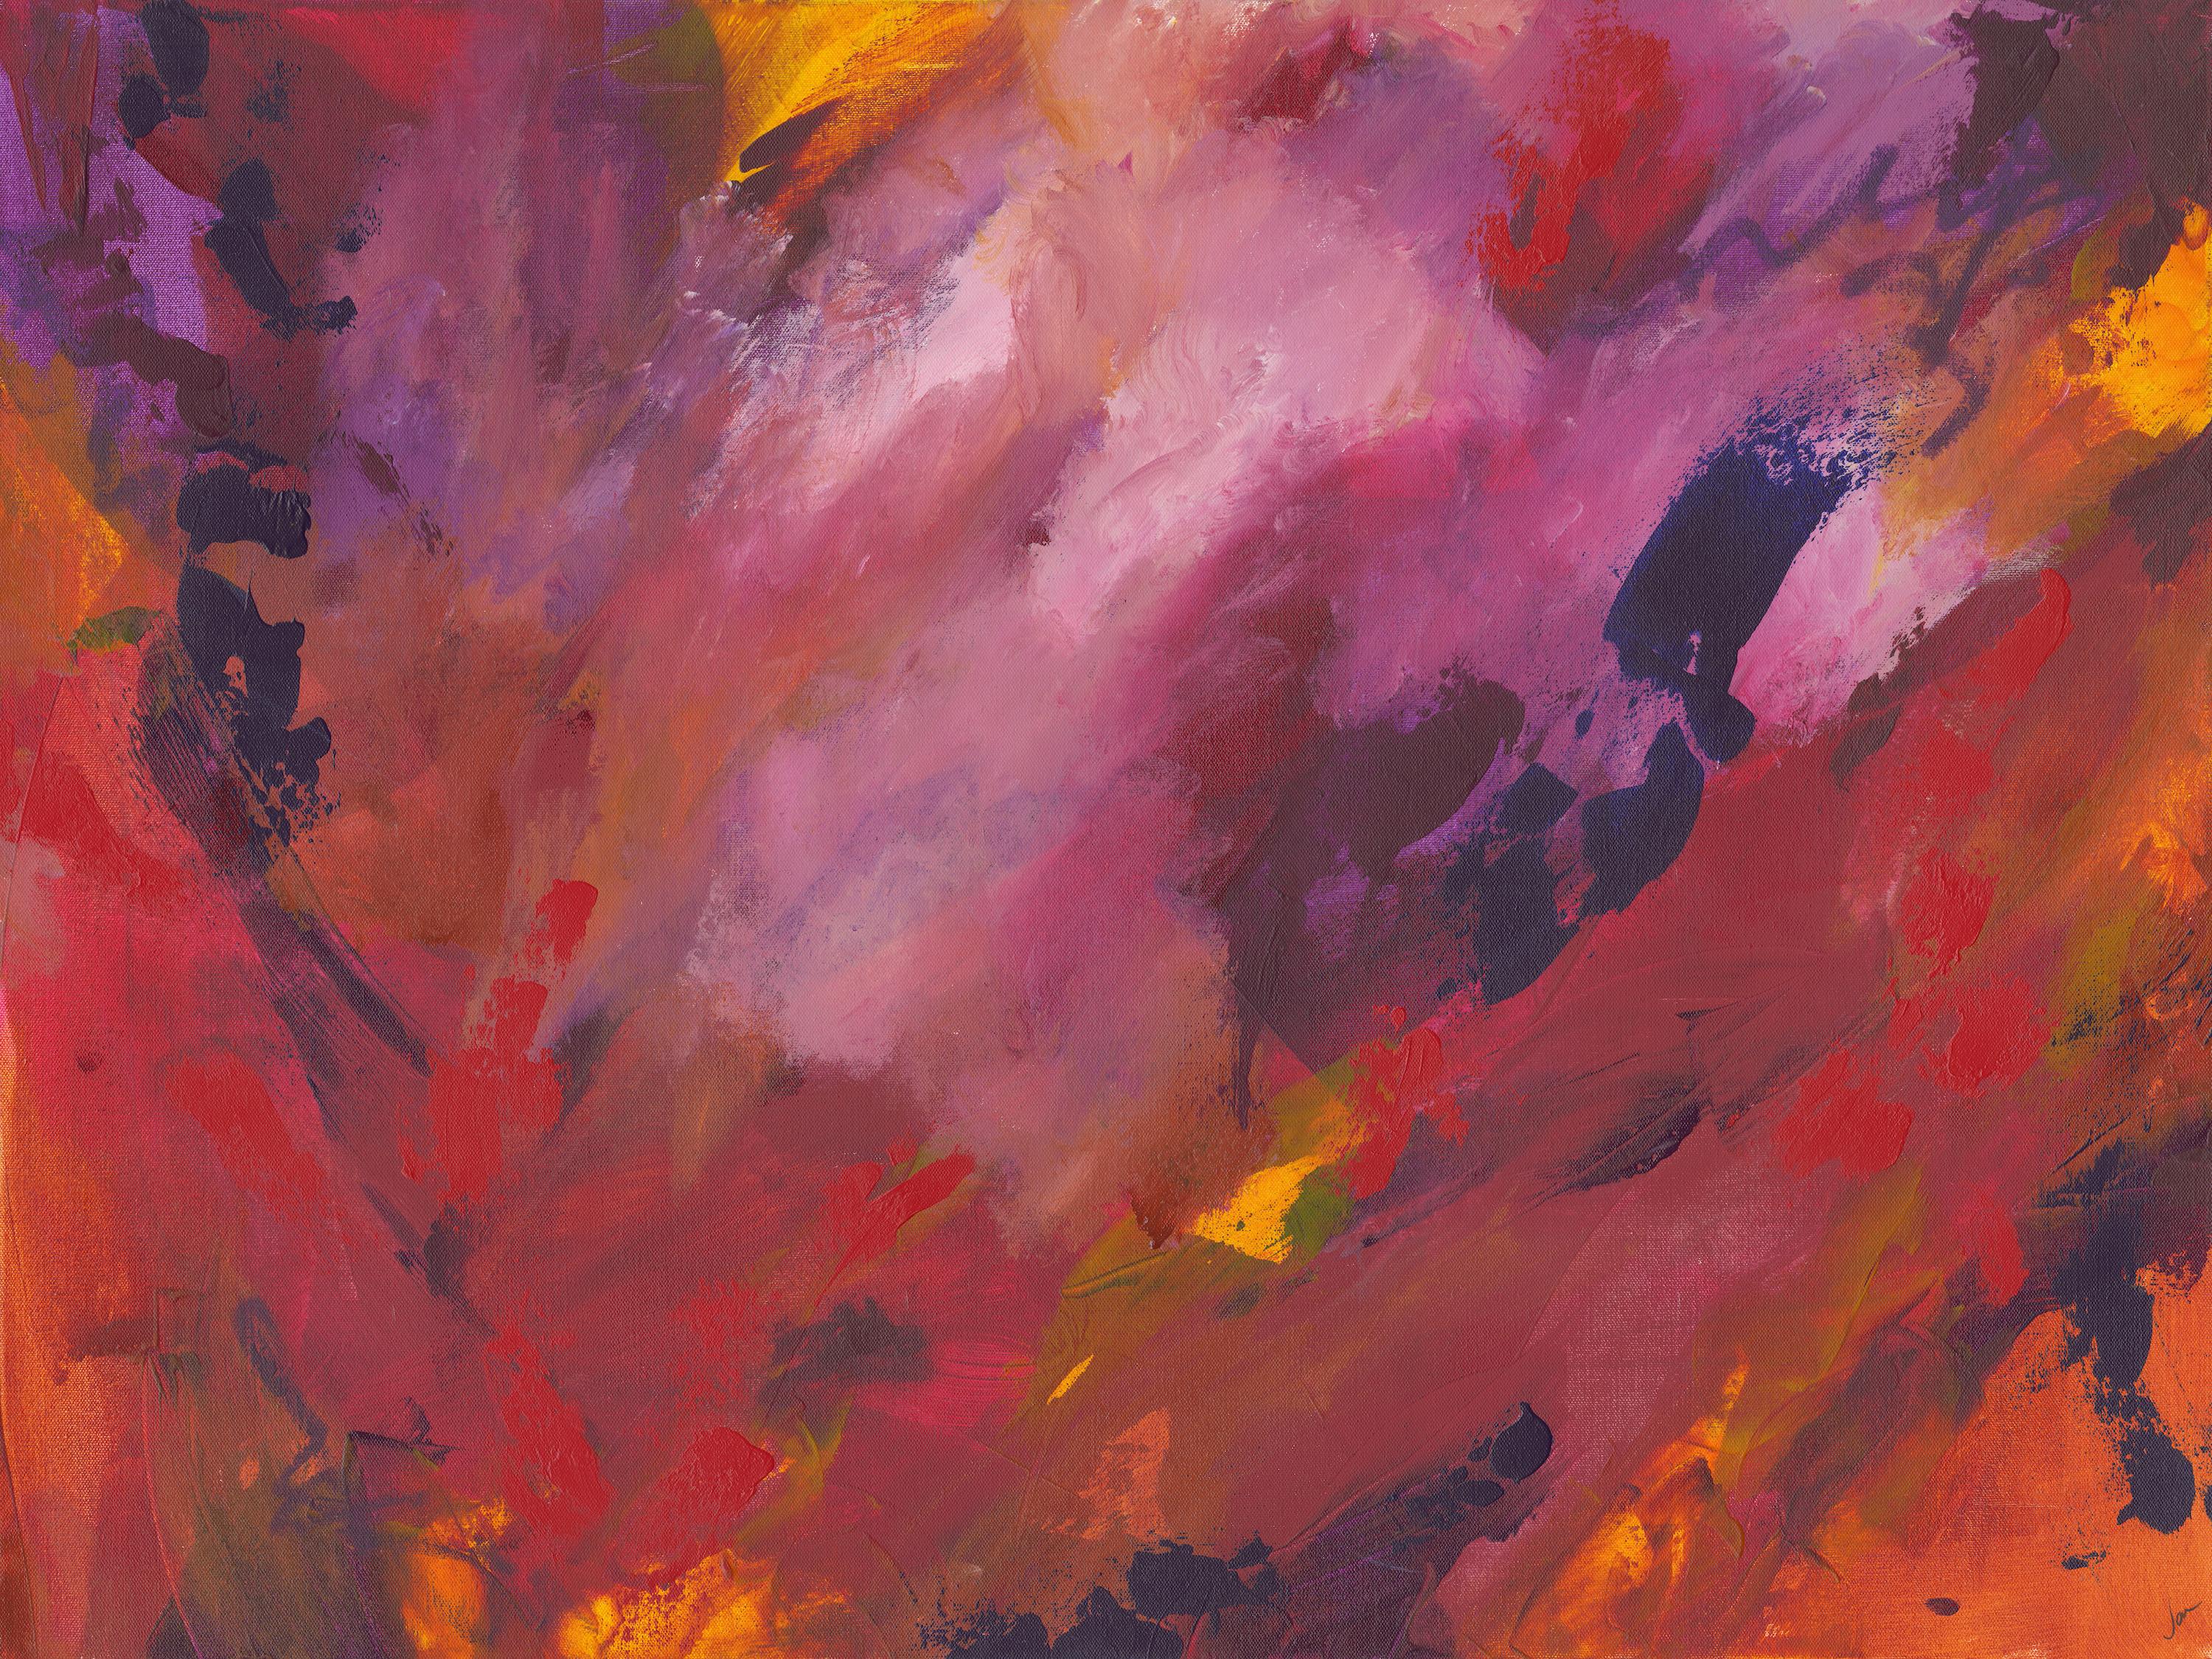 Aha Moment, Original Contemporary Dramatic Expressionist Abstract Painting
30x40 (HxW), Acrylic Paint

Sporadic brushstrokes and large sweeps of color create an energetic frenzy on the surface of this canvas painting by artist Jen Sterling. Bold